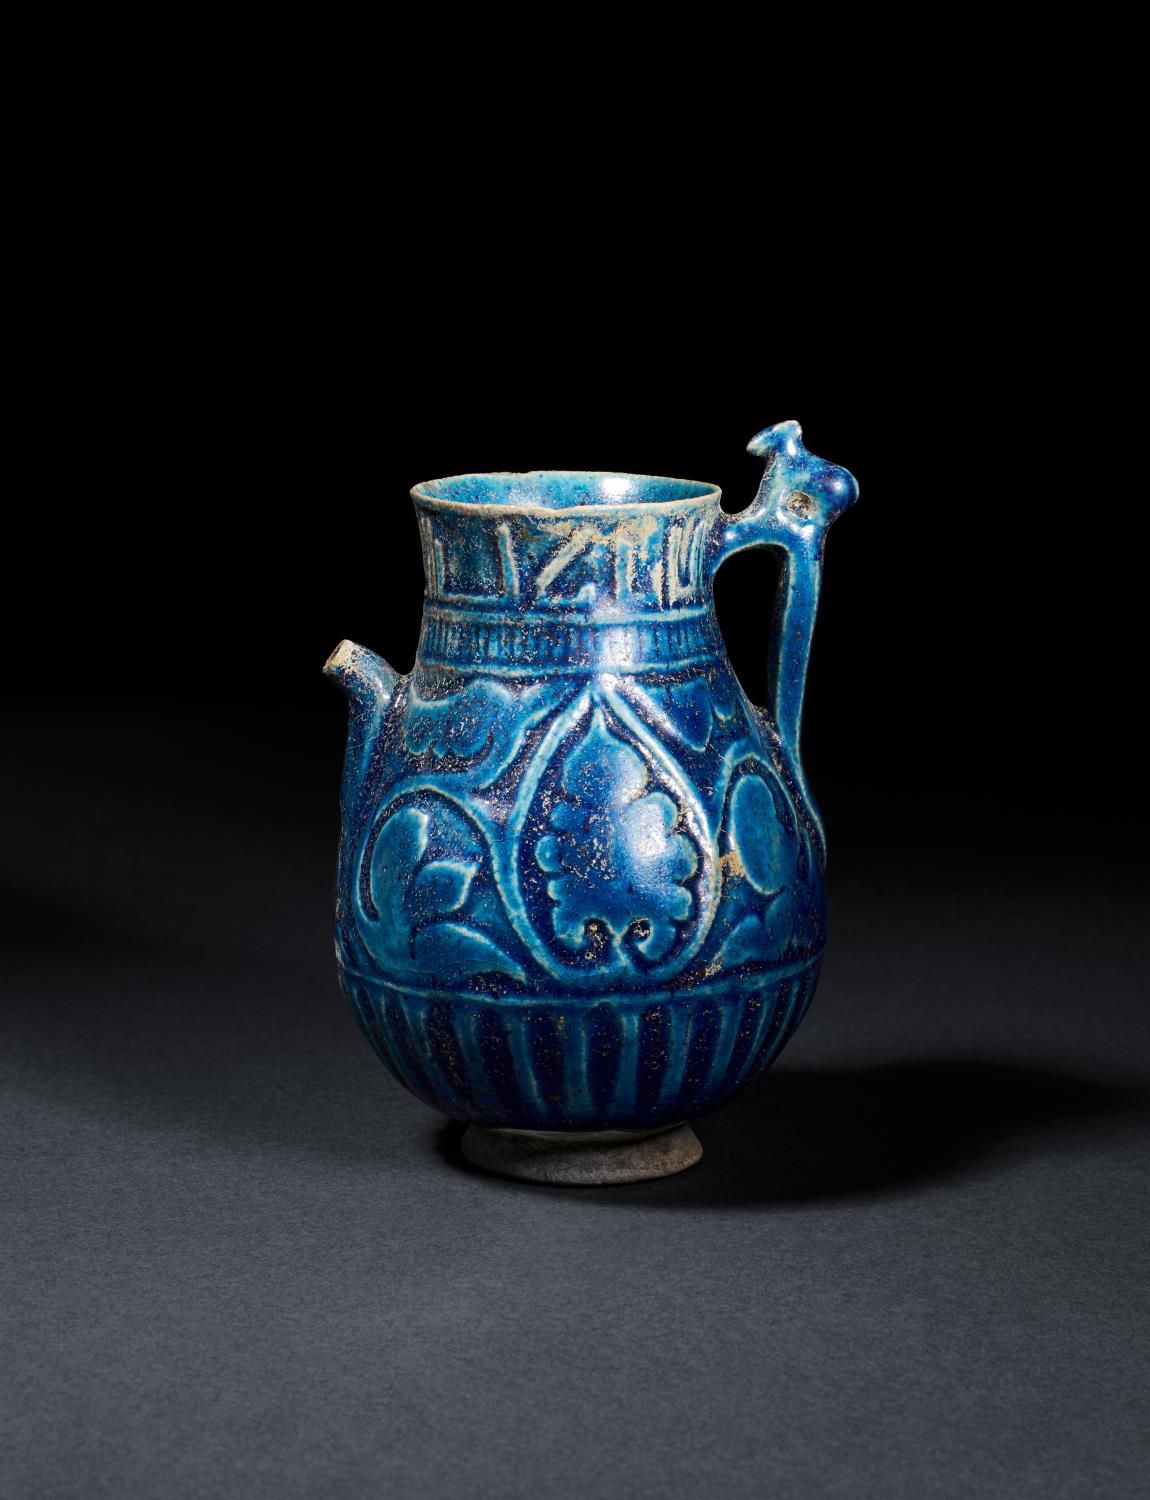 A RARE KUFIC INSCRIBED SELJUK MONOCHROME MOULDED POTTERY JUG, 12TH CENTURY, PERS&hellip;